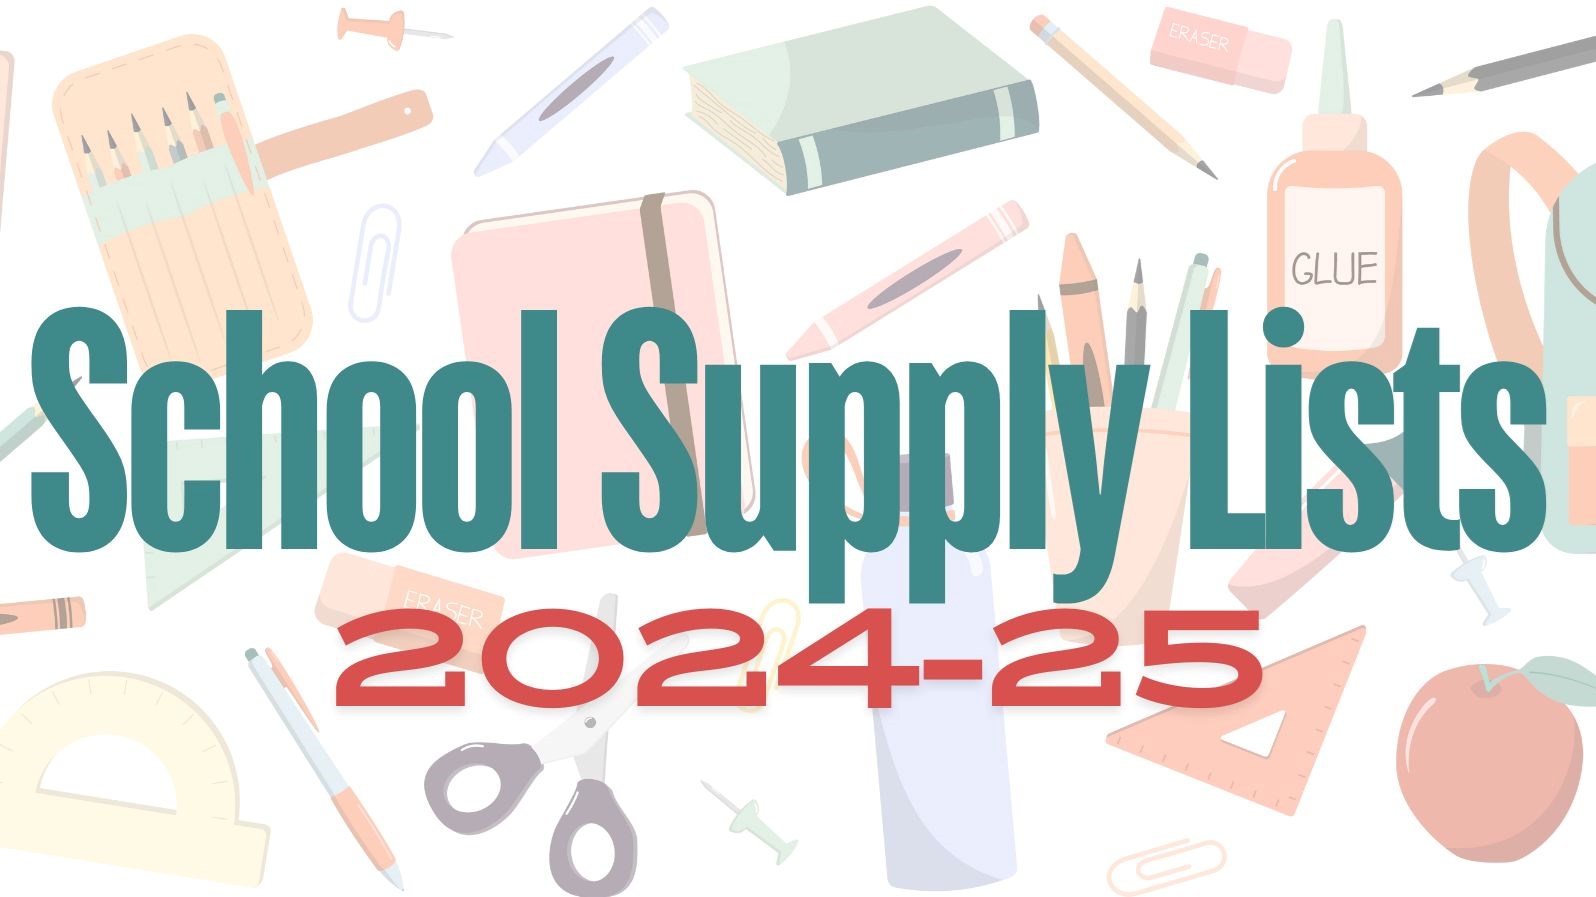 School Supply Lists for the 2024 through 25 school year.